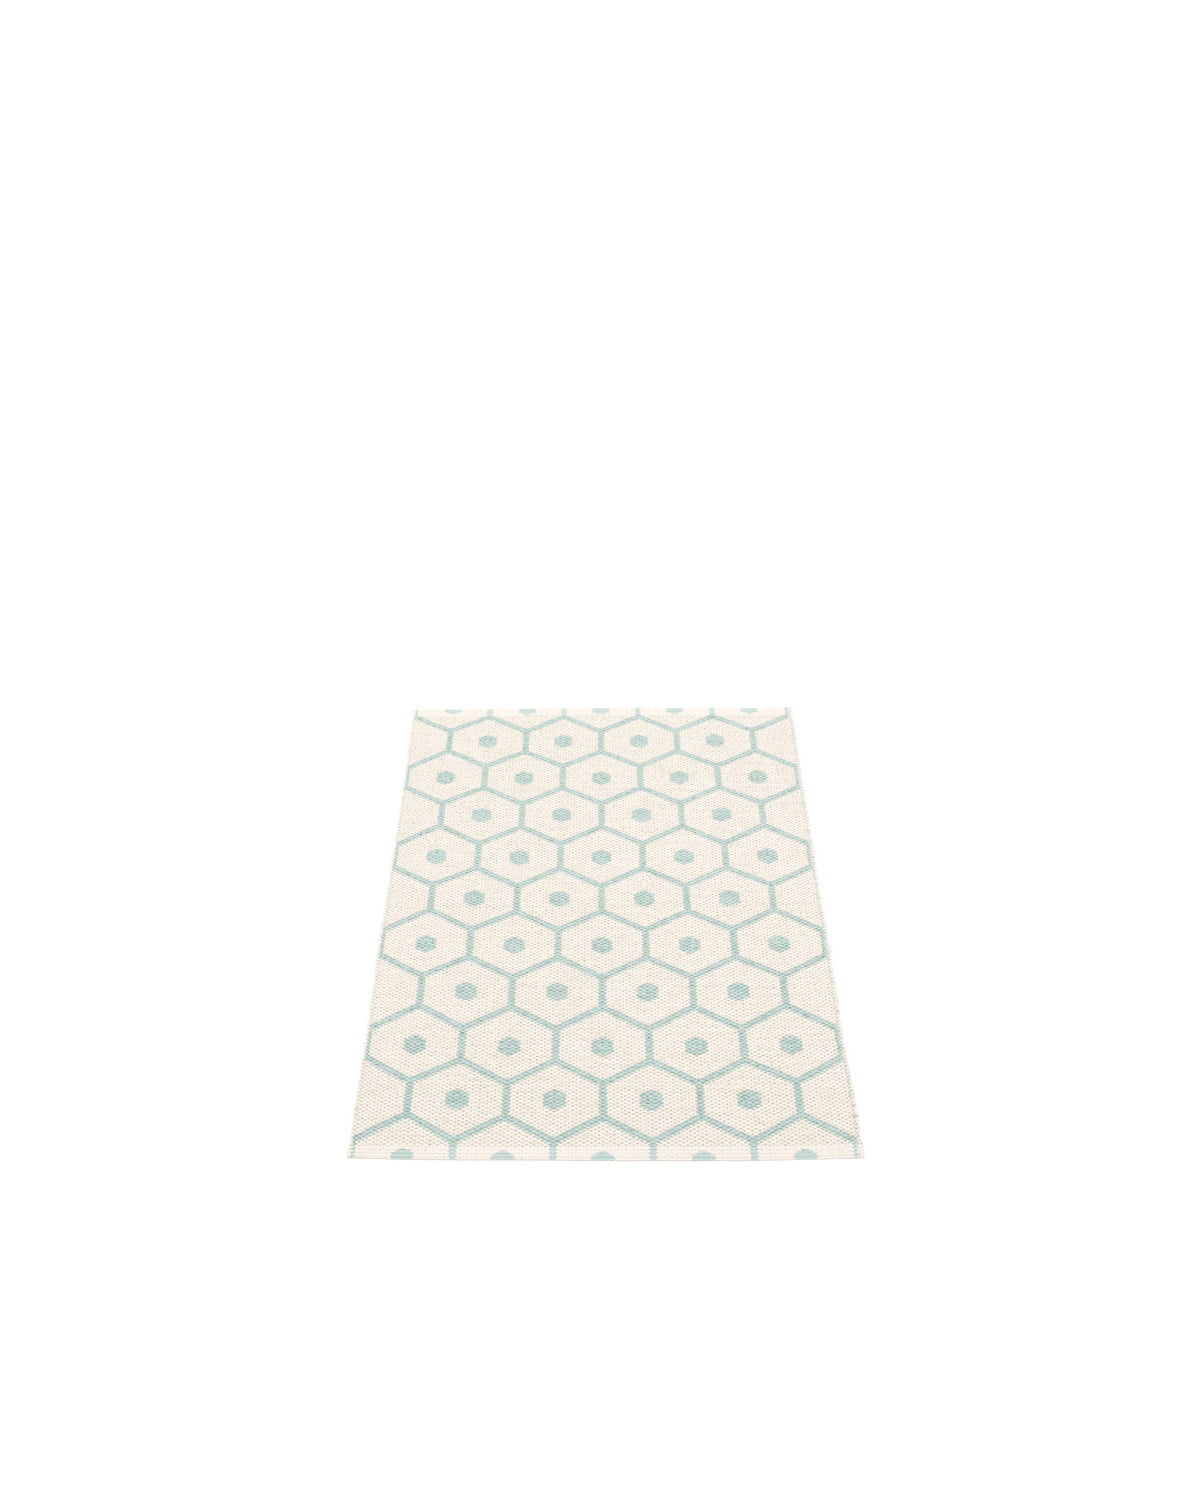 Pappelina Rug HONEY Pale Turquoise  image 6